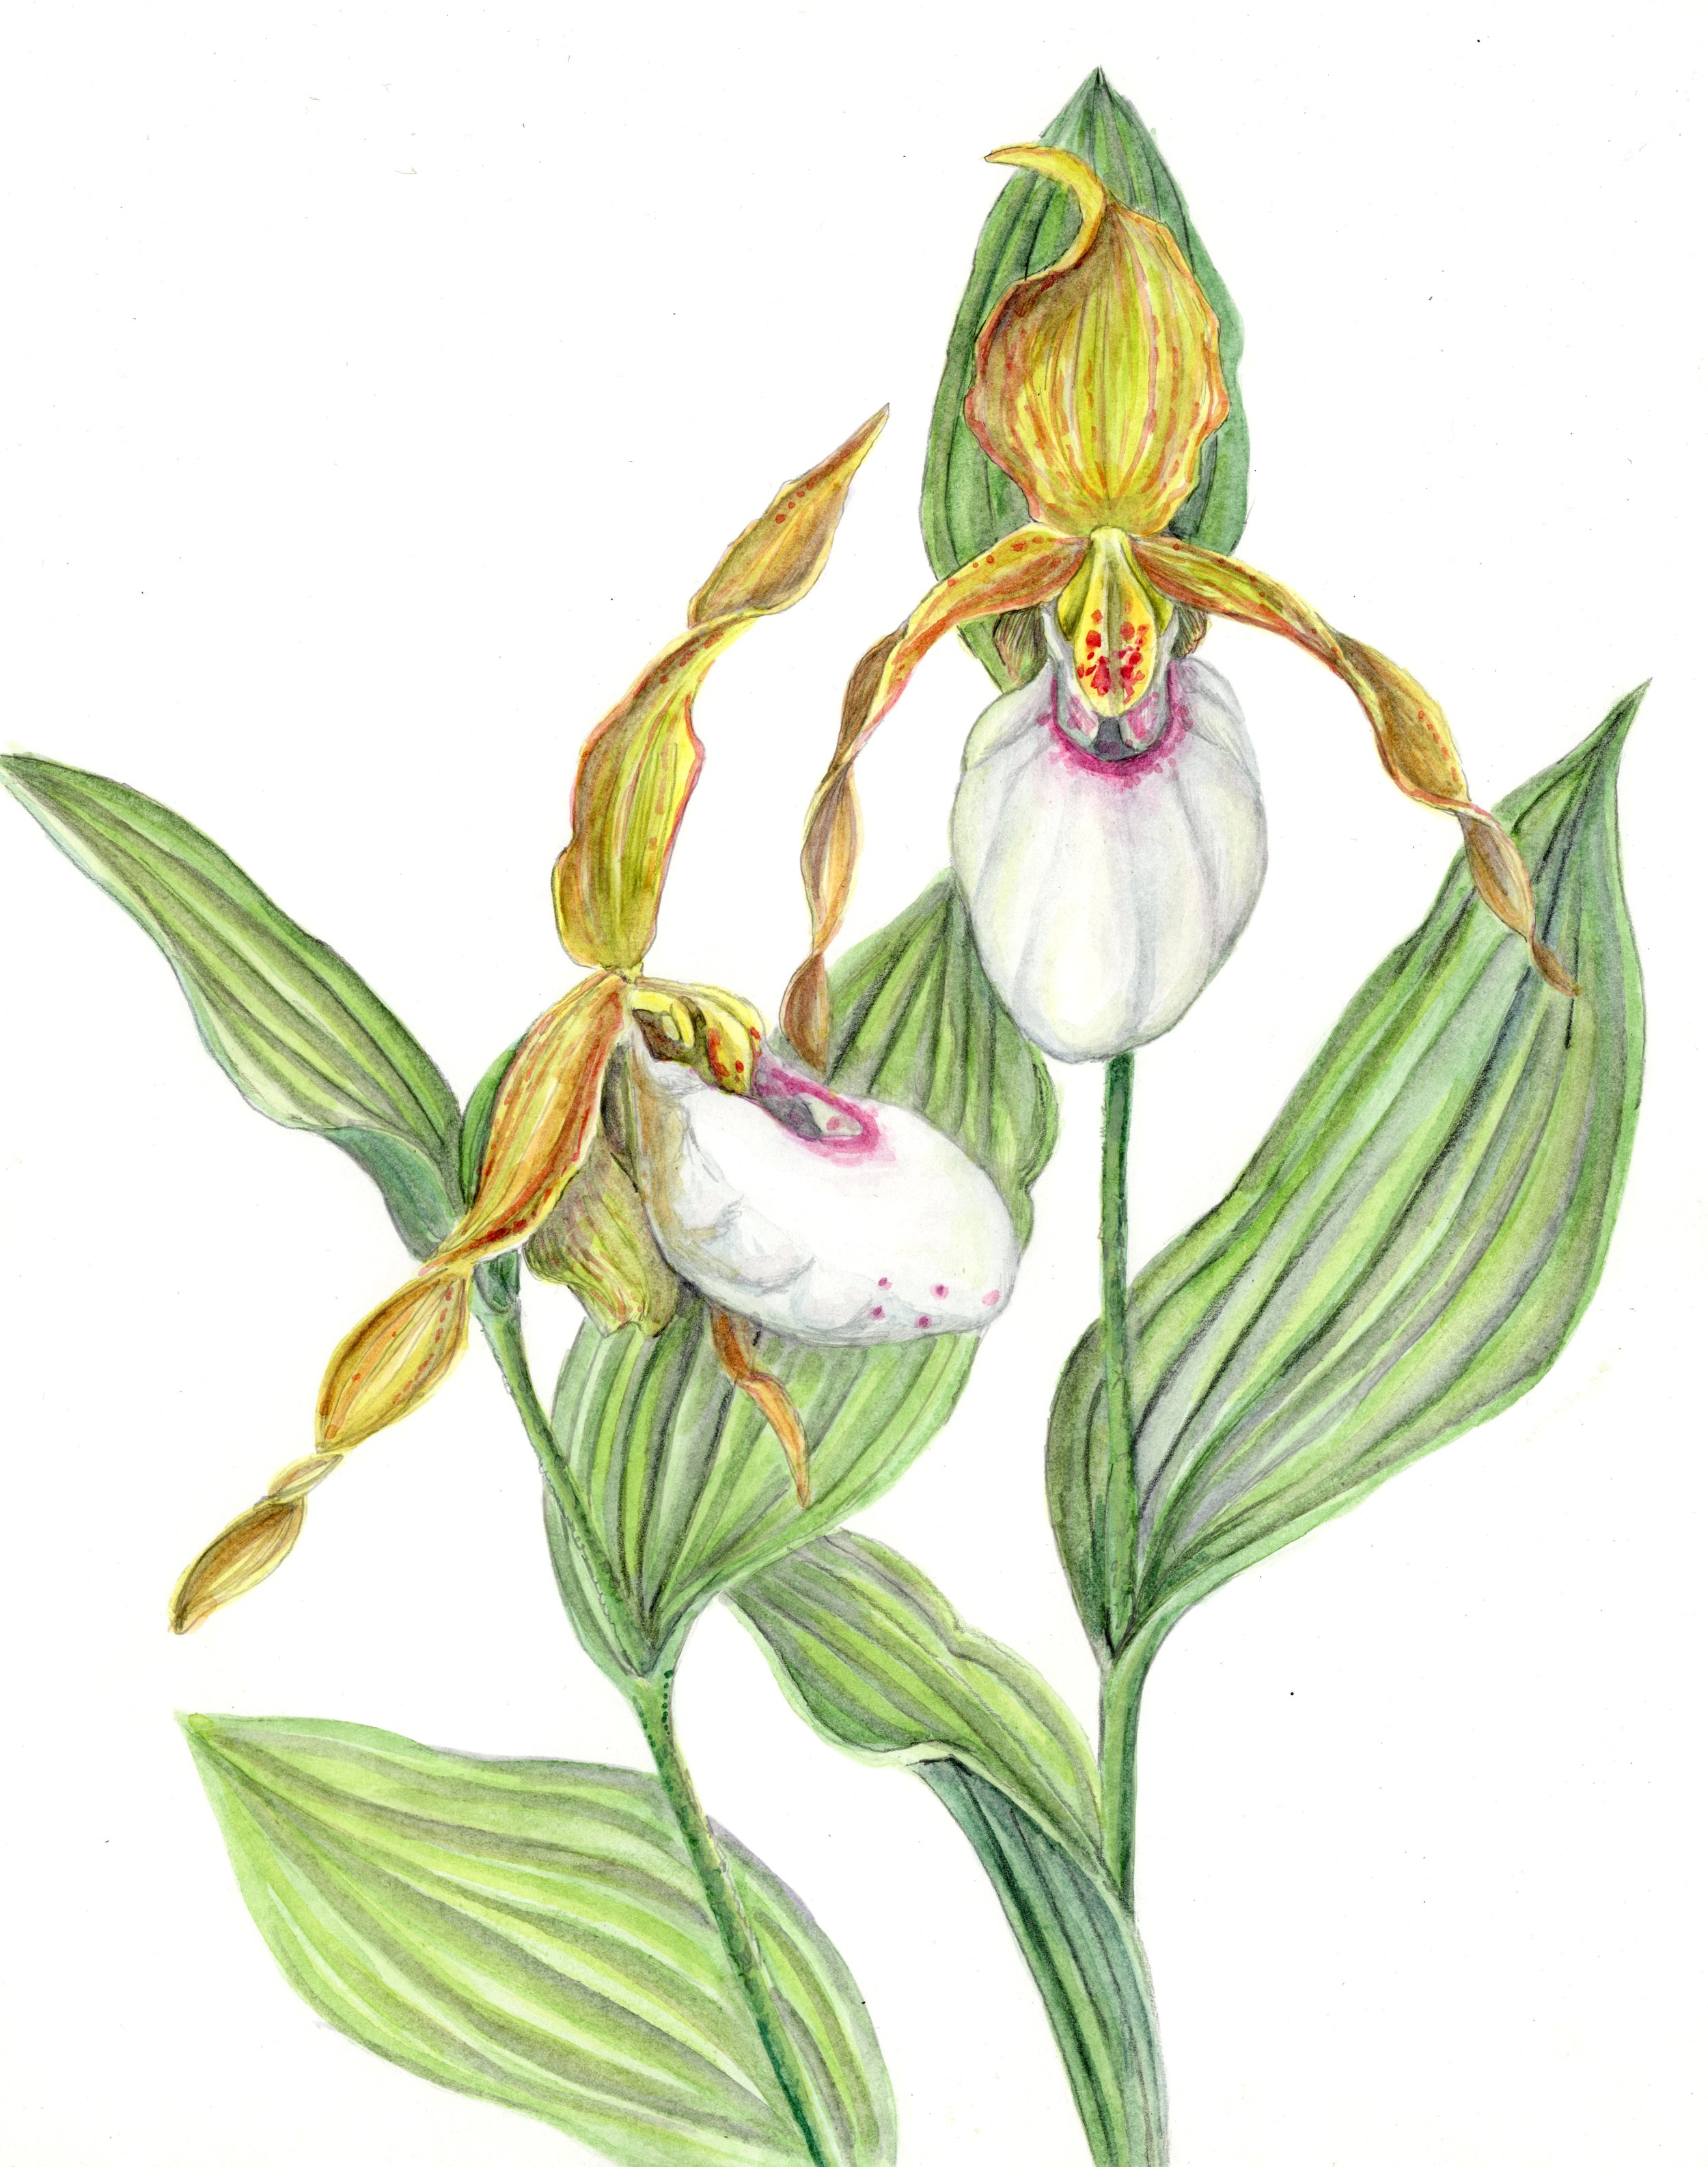 Mountain Lady Slipper Orchid